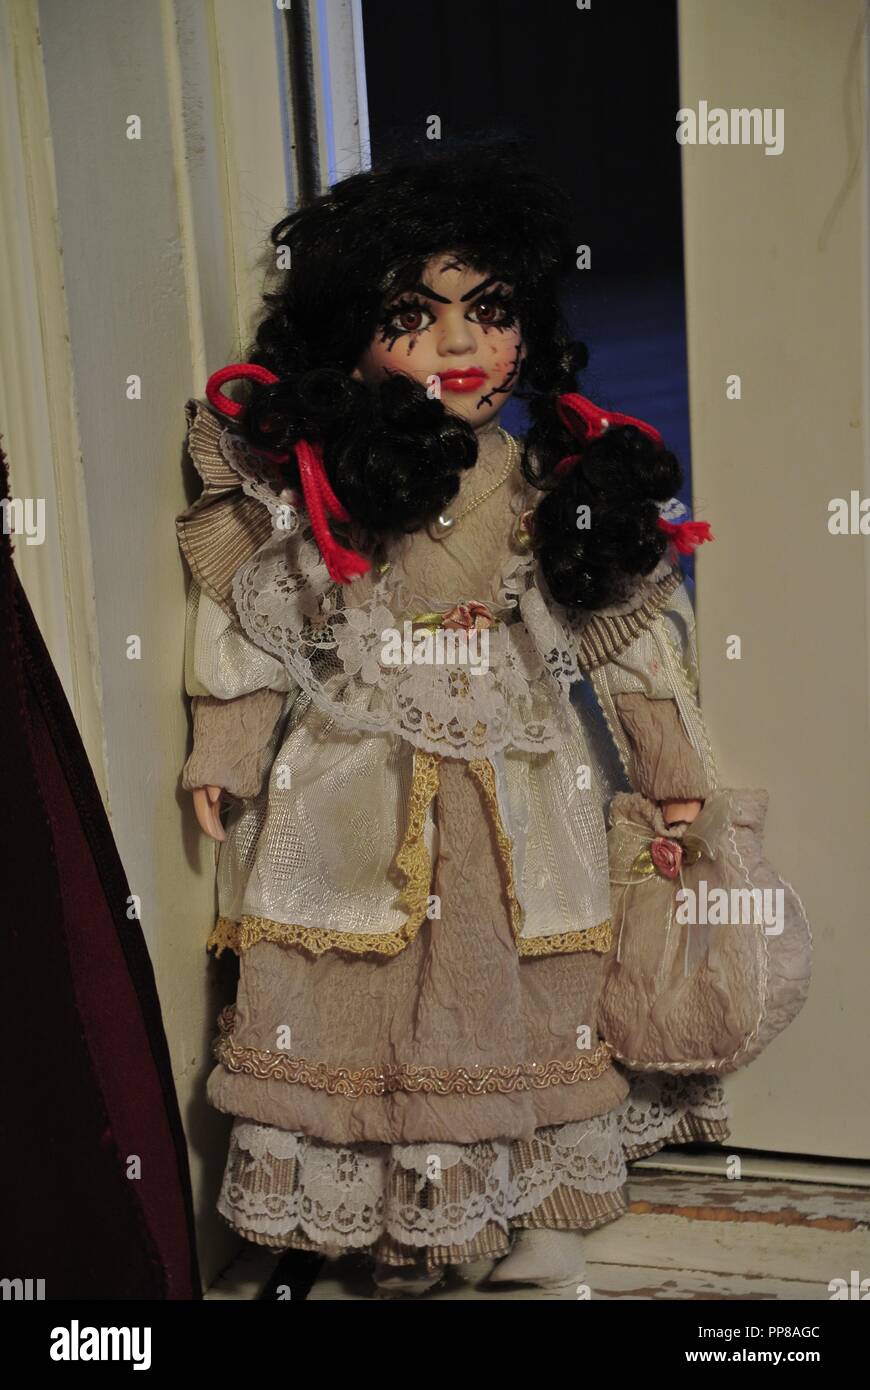 A creepy antique porcelain doll with long black hair and a scary, beautiful face with scars,,dressed in a white vintage dress, coming at you Halloween Stock Photo